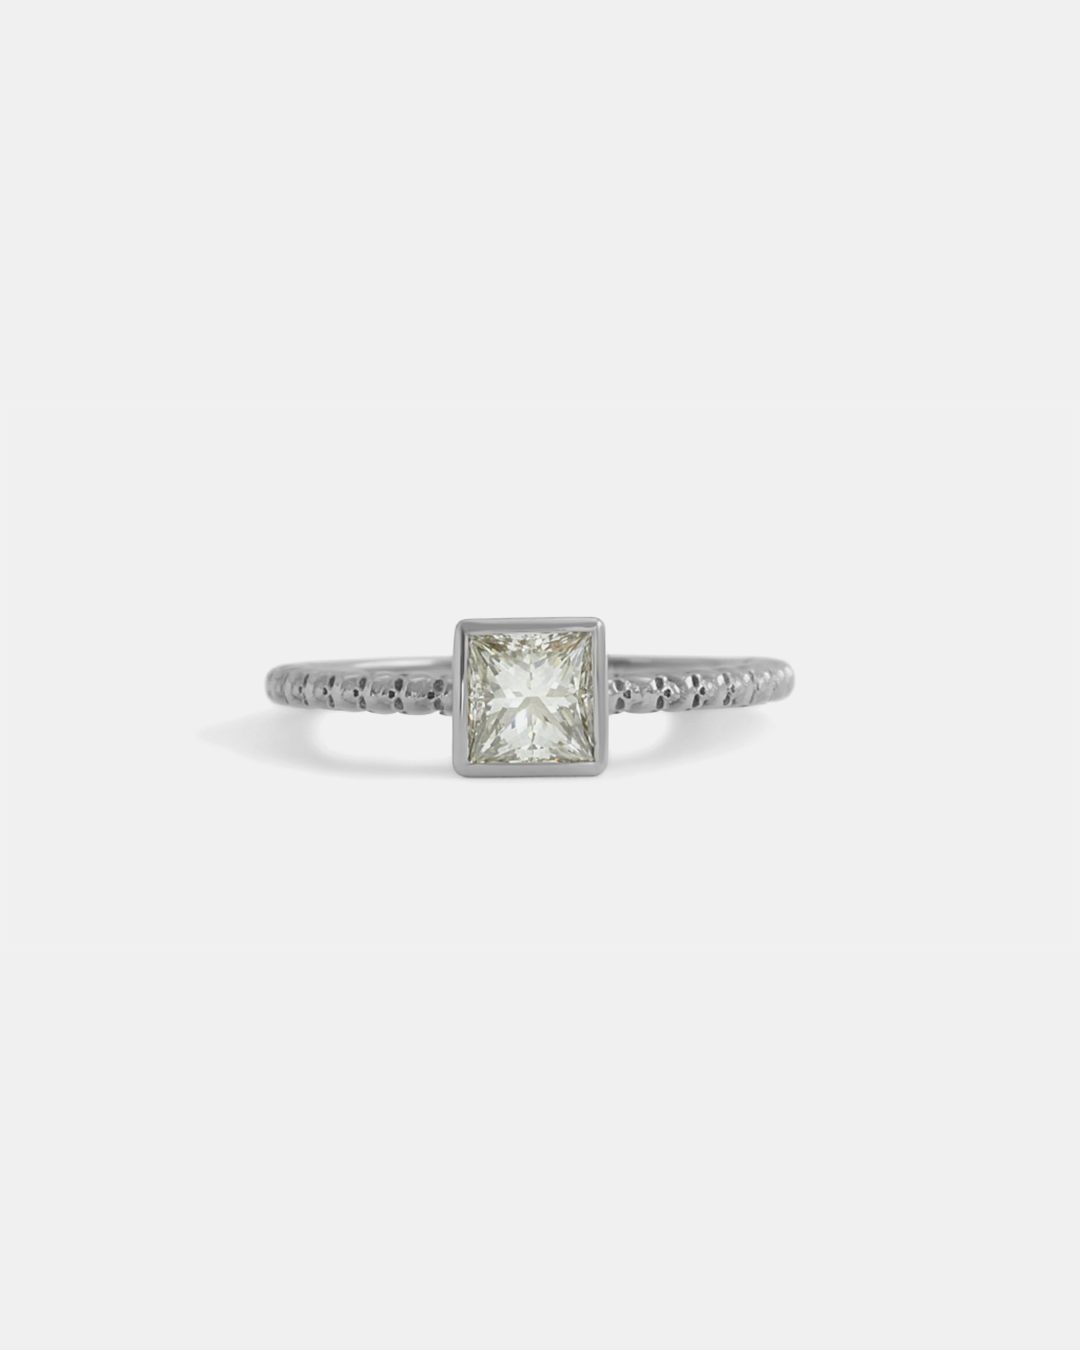 Square Bezel Skull Shank / White Diamond By fitzgerald jewelry in Engagement Rings Category